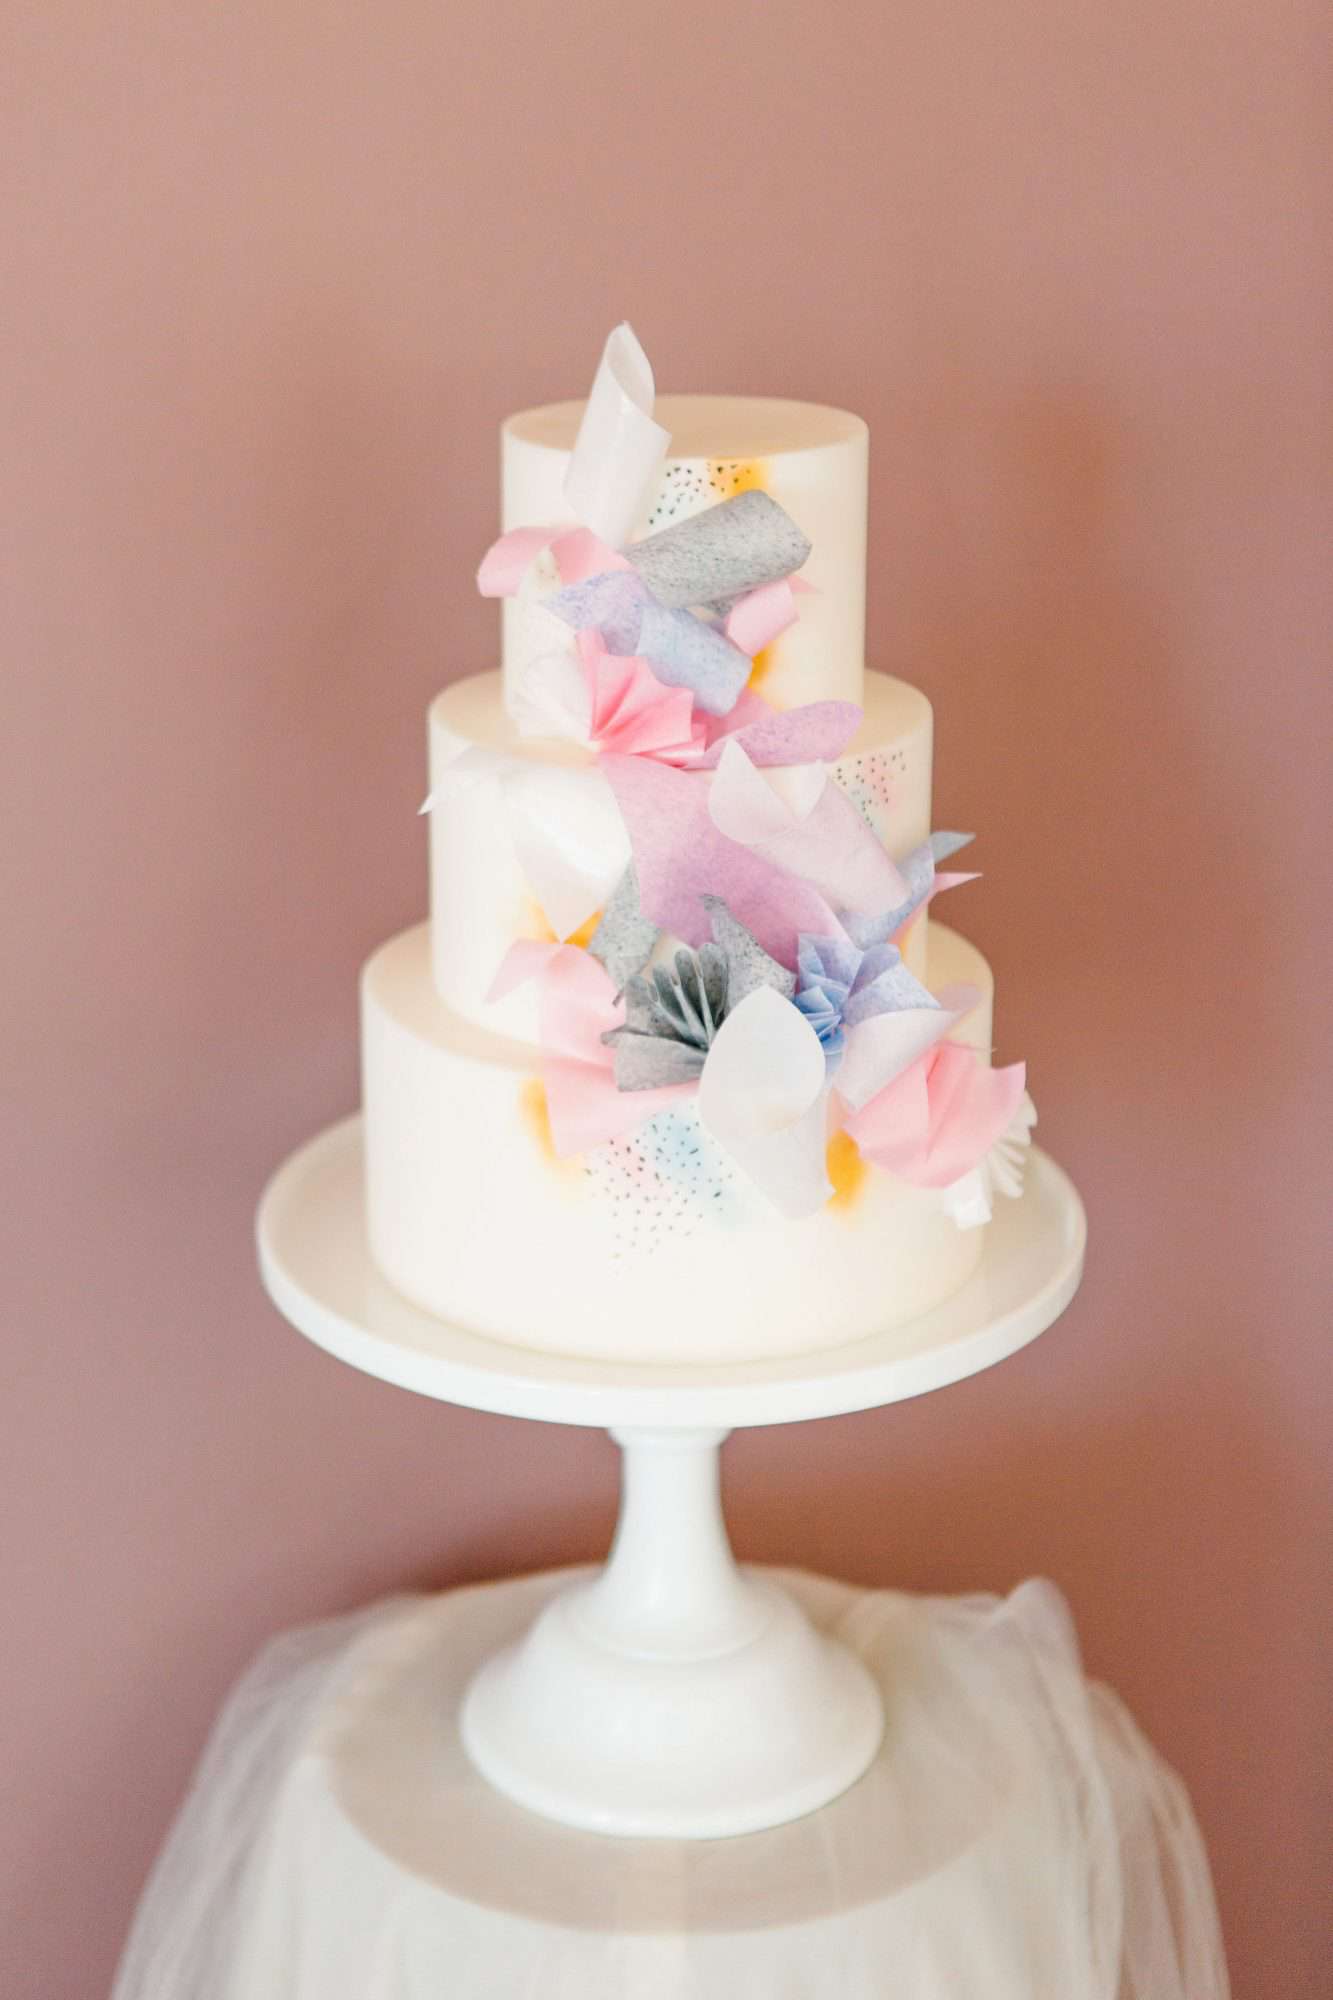 3-tier white cake decorated with pastel paper pieces